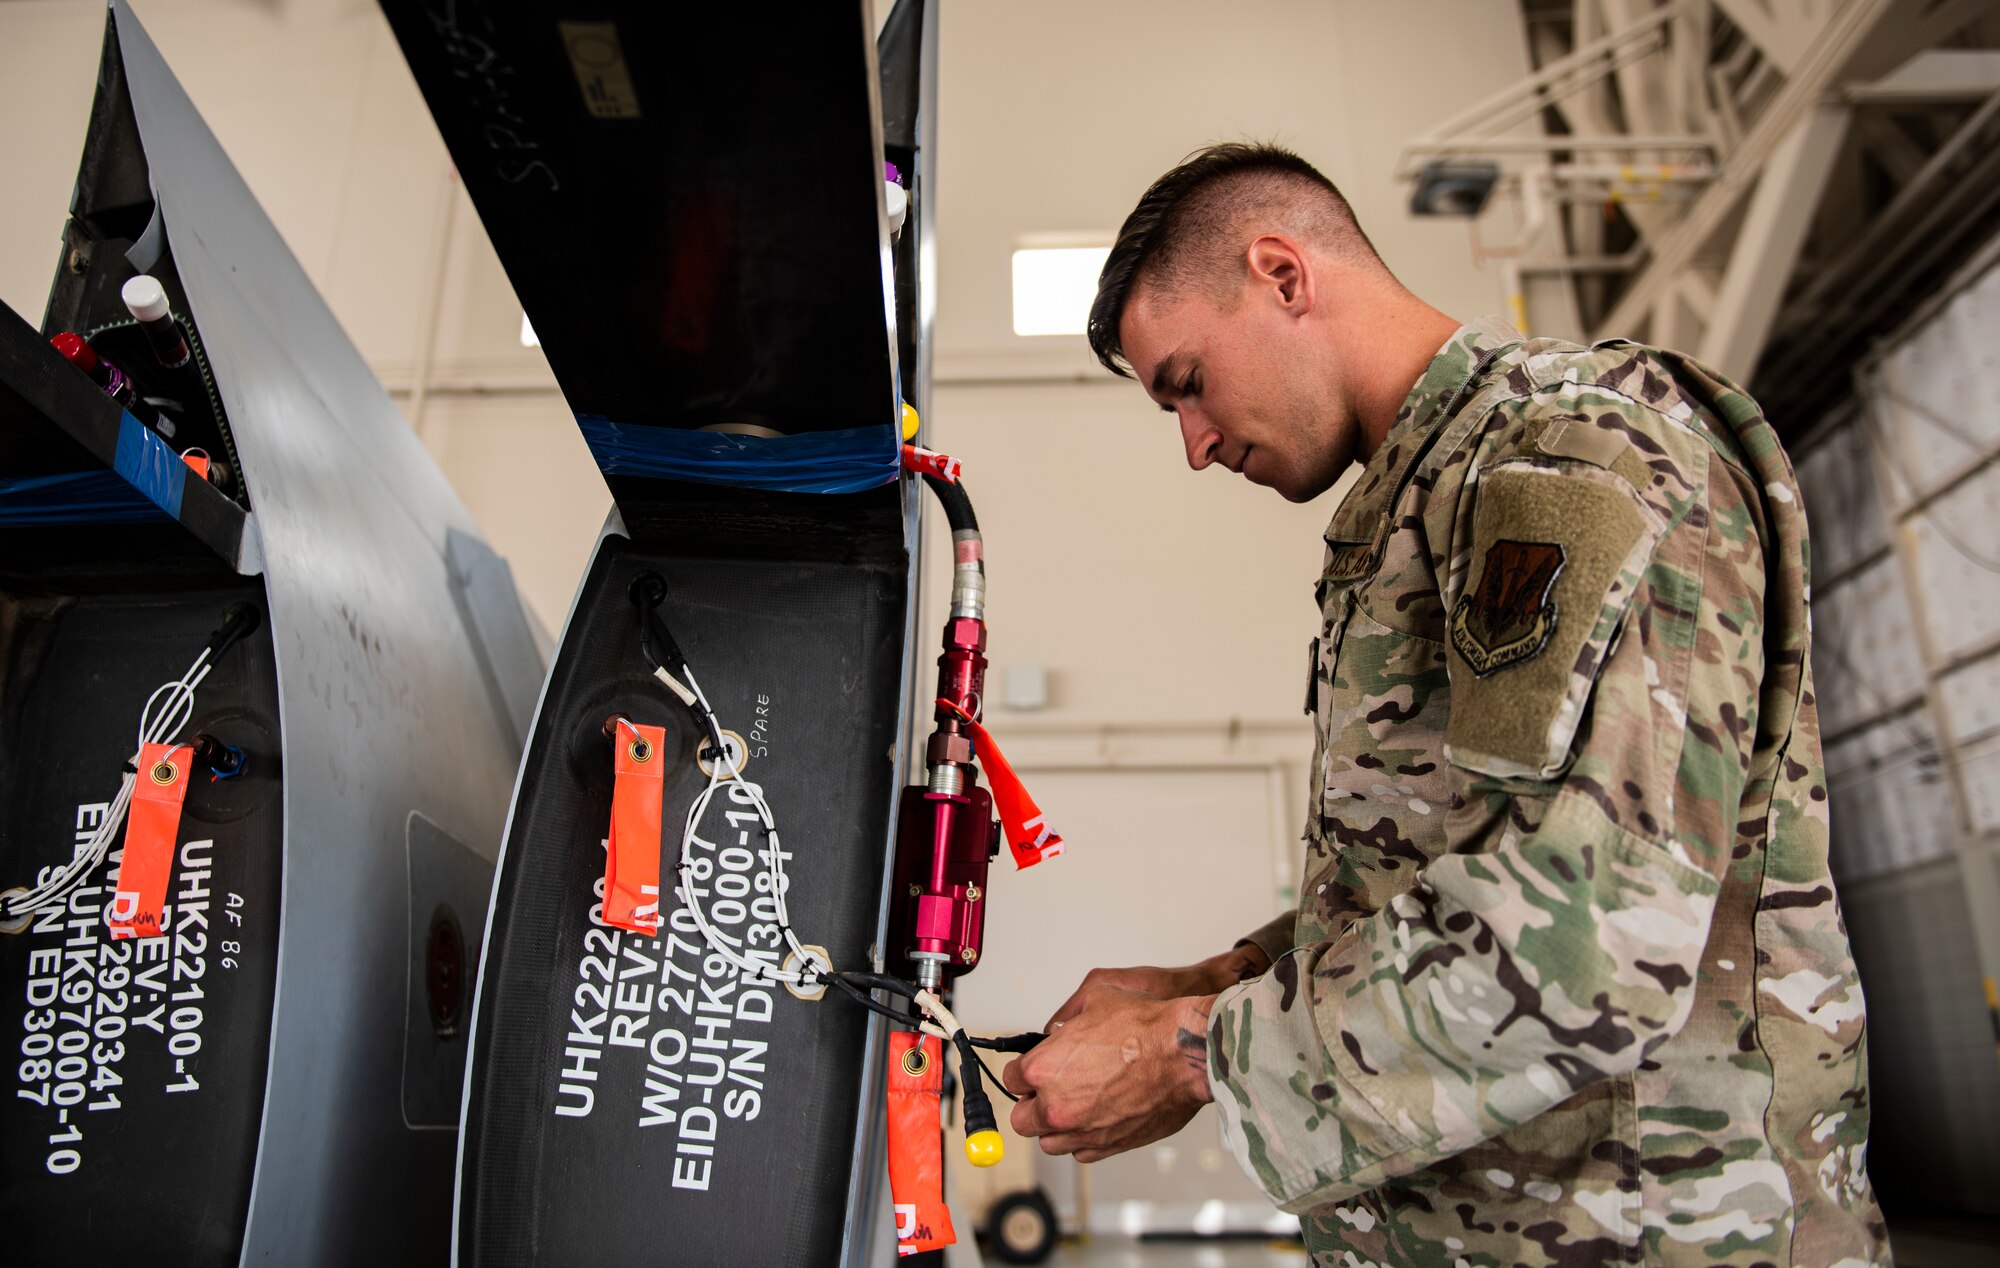 Senior Airman Levi inspects parts of a detached wing from an MQ-9 Reaper.